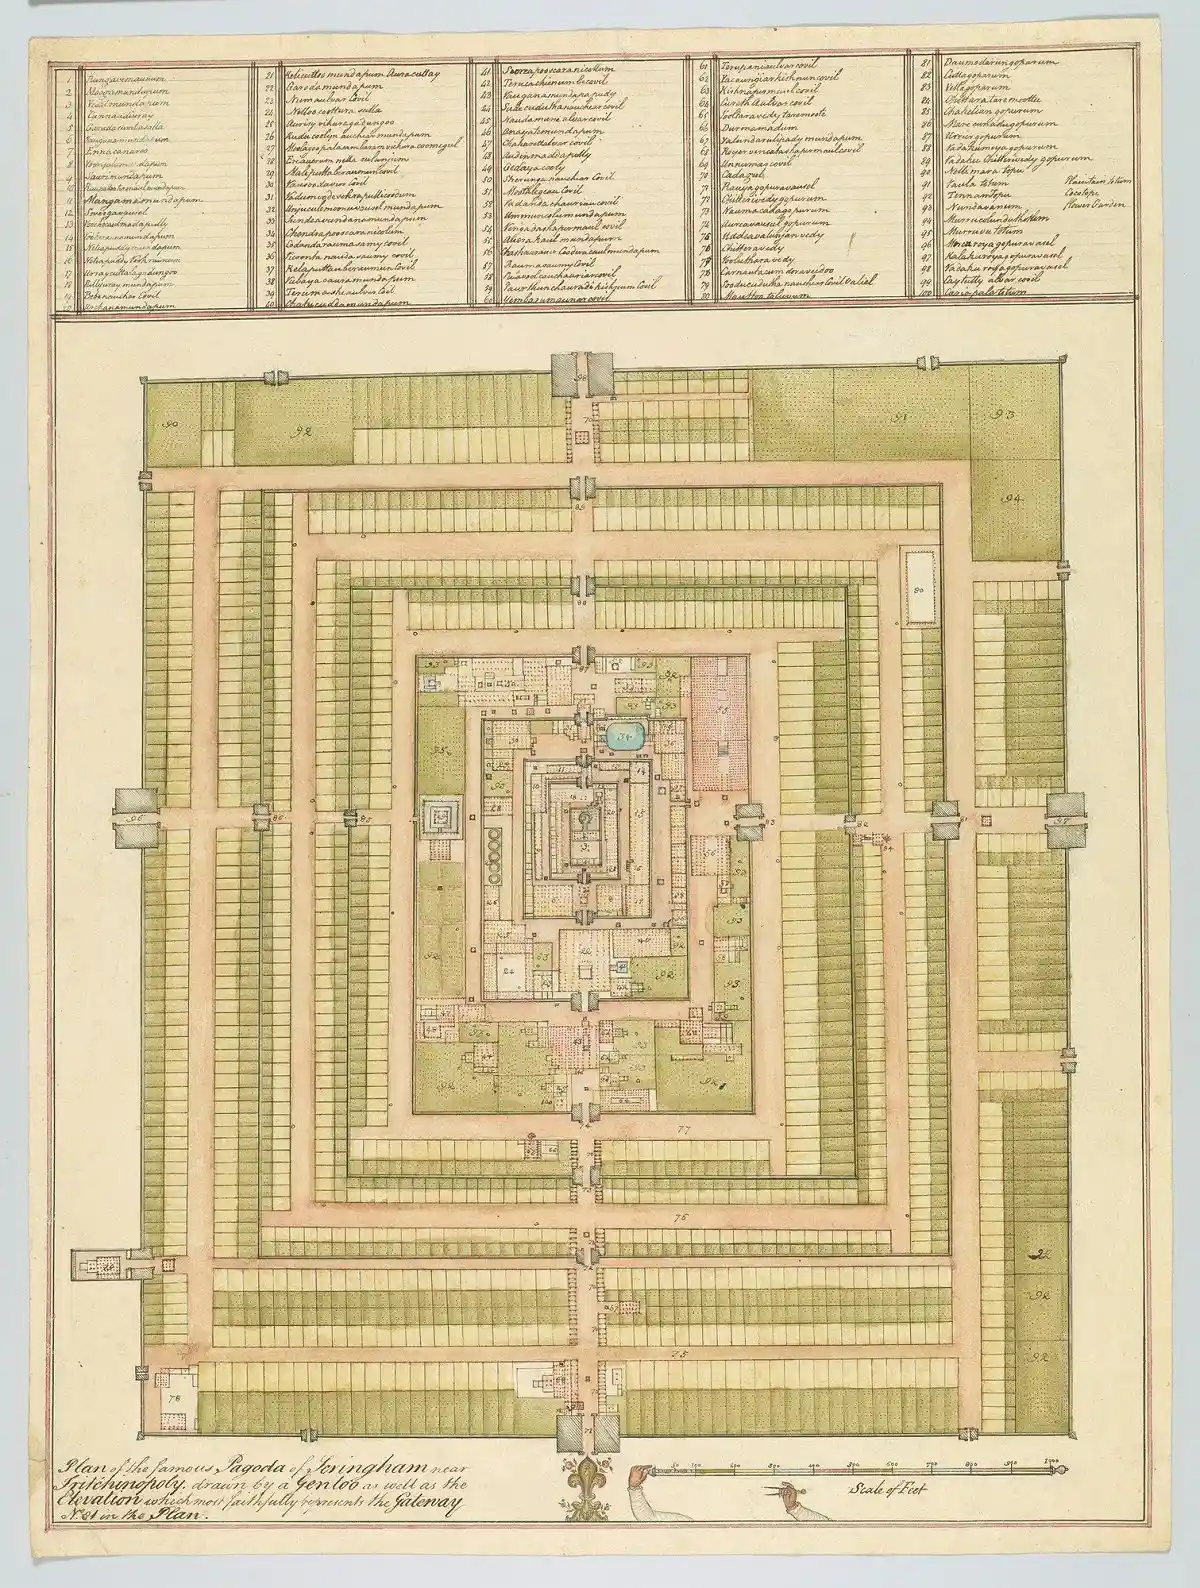 Structure of Ranganathaswamy Temple; Image Source: Royal Collection Trust